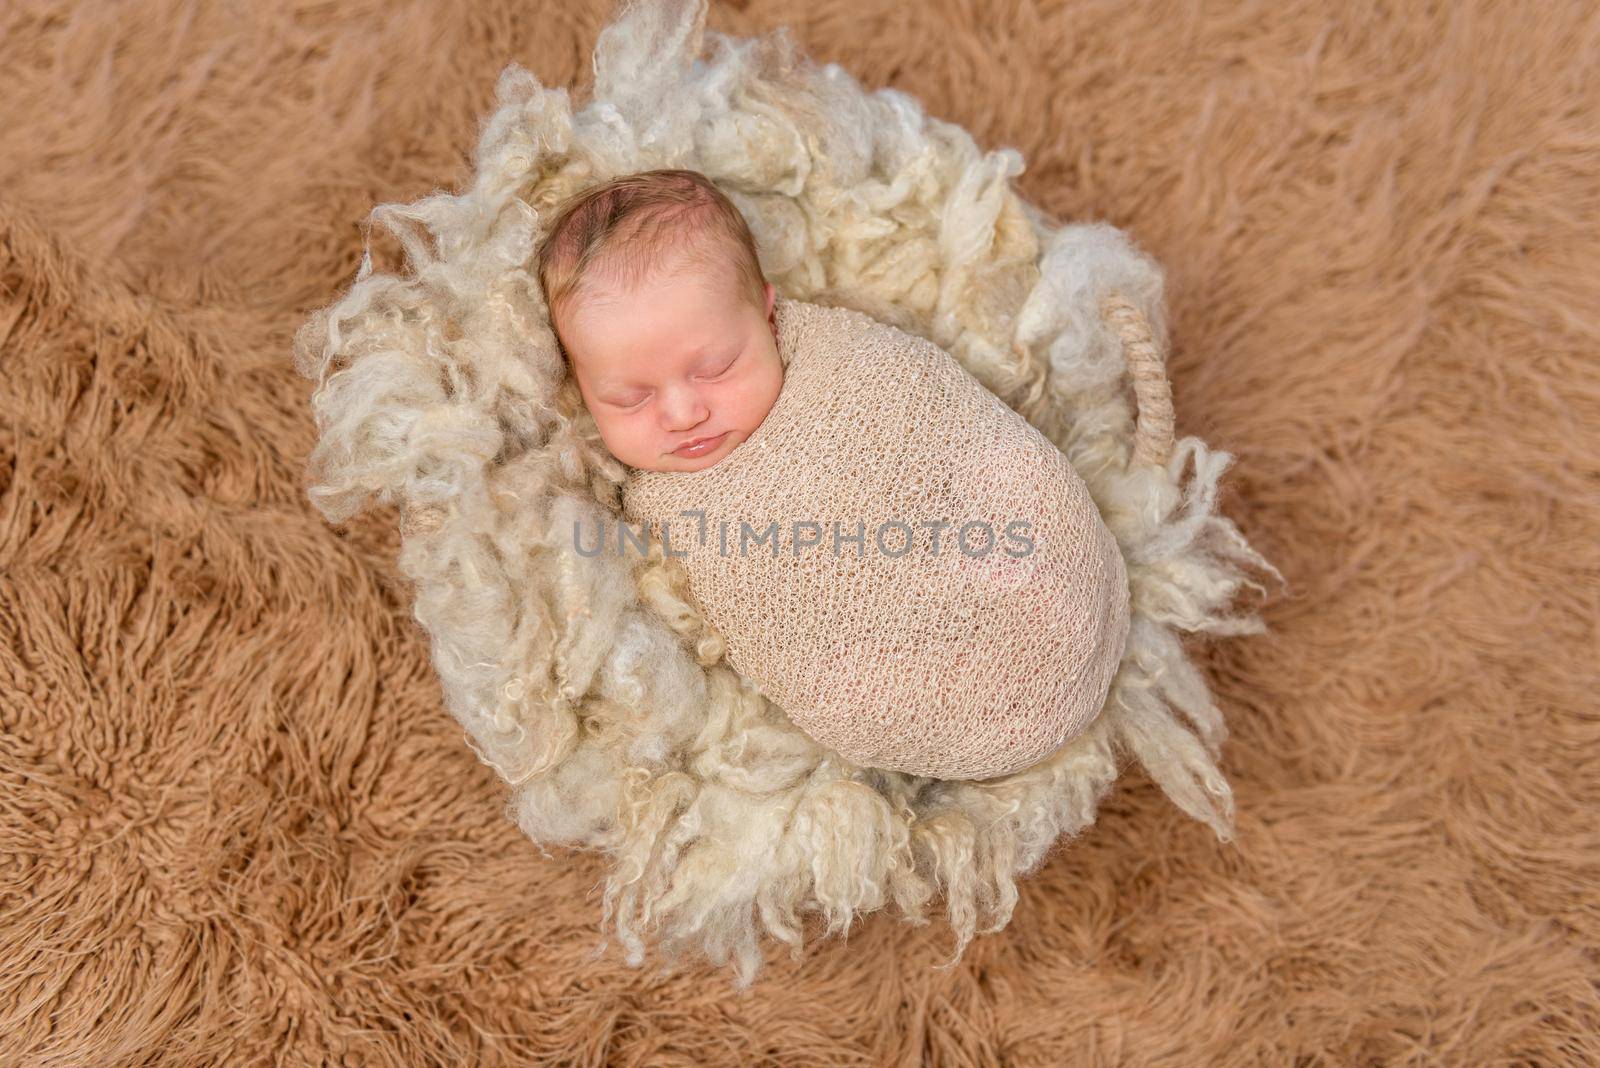 sweet sleeping swaddled newborn on fluffy terry blanket, top view